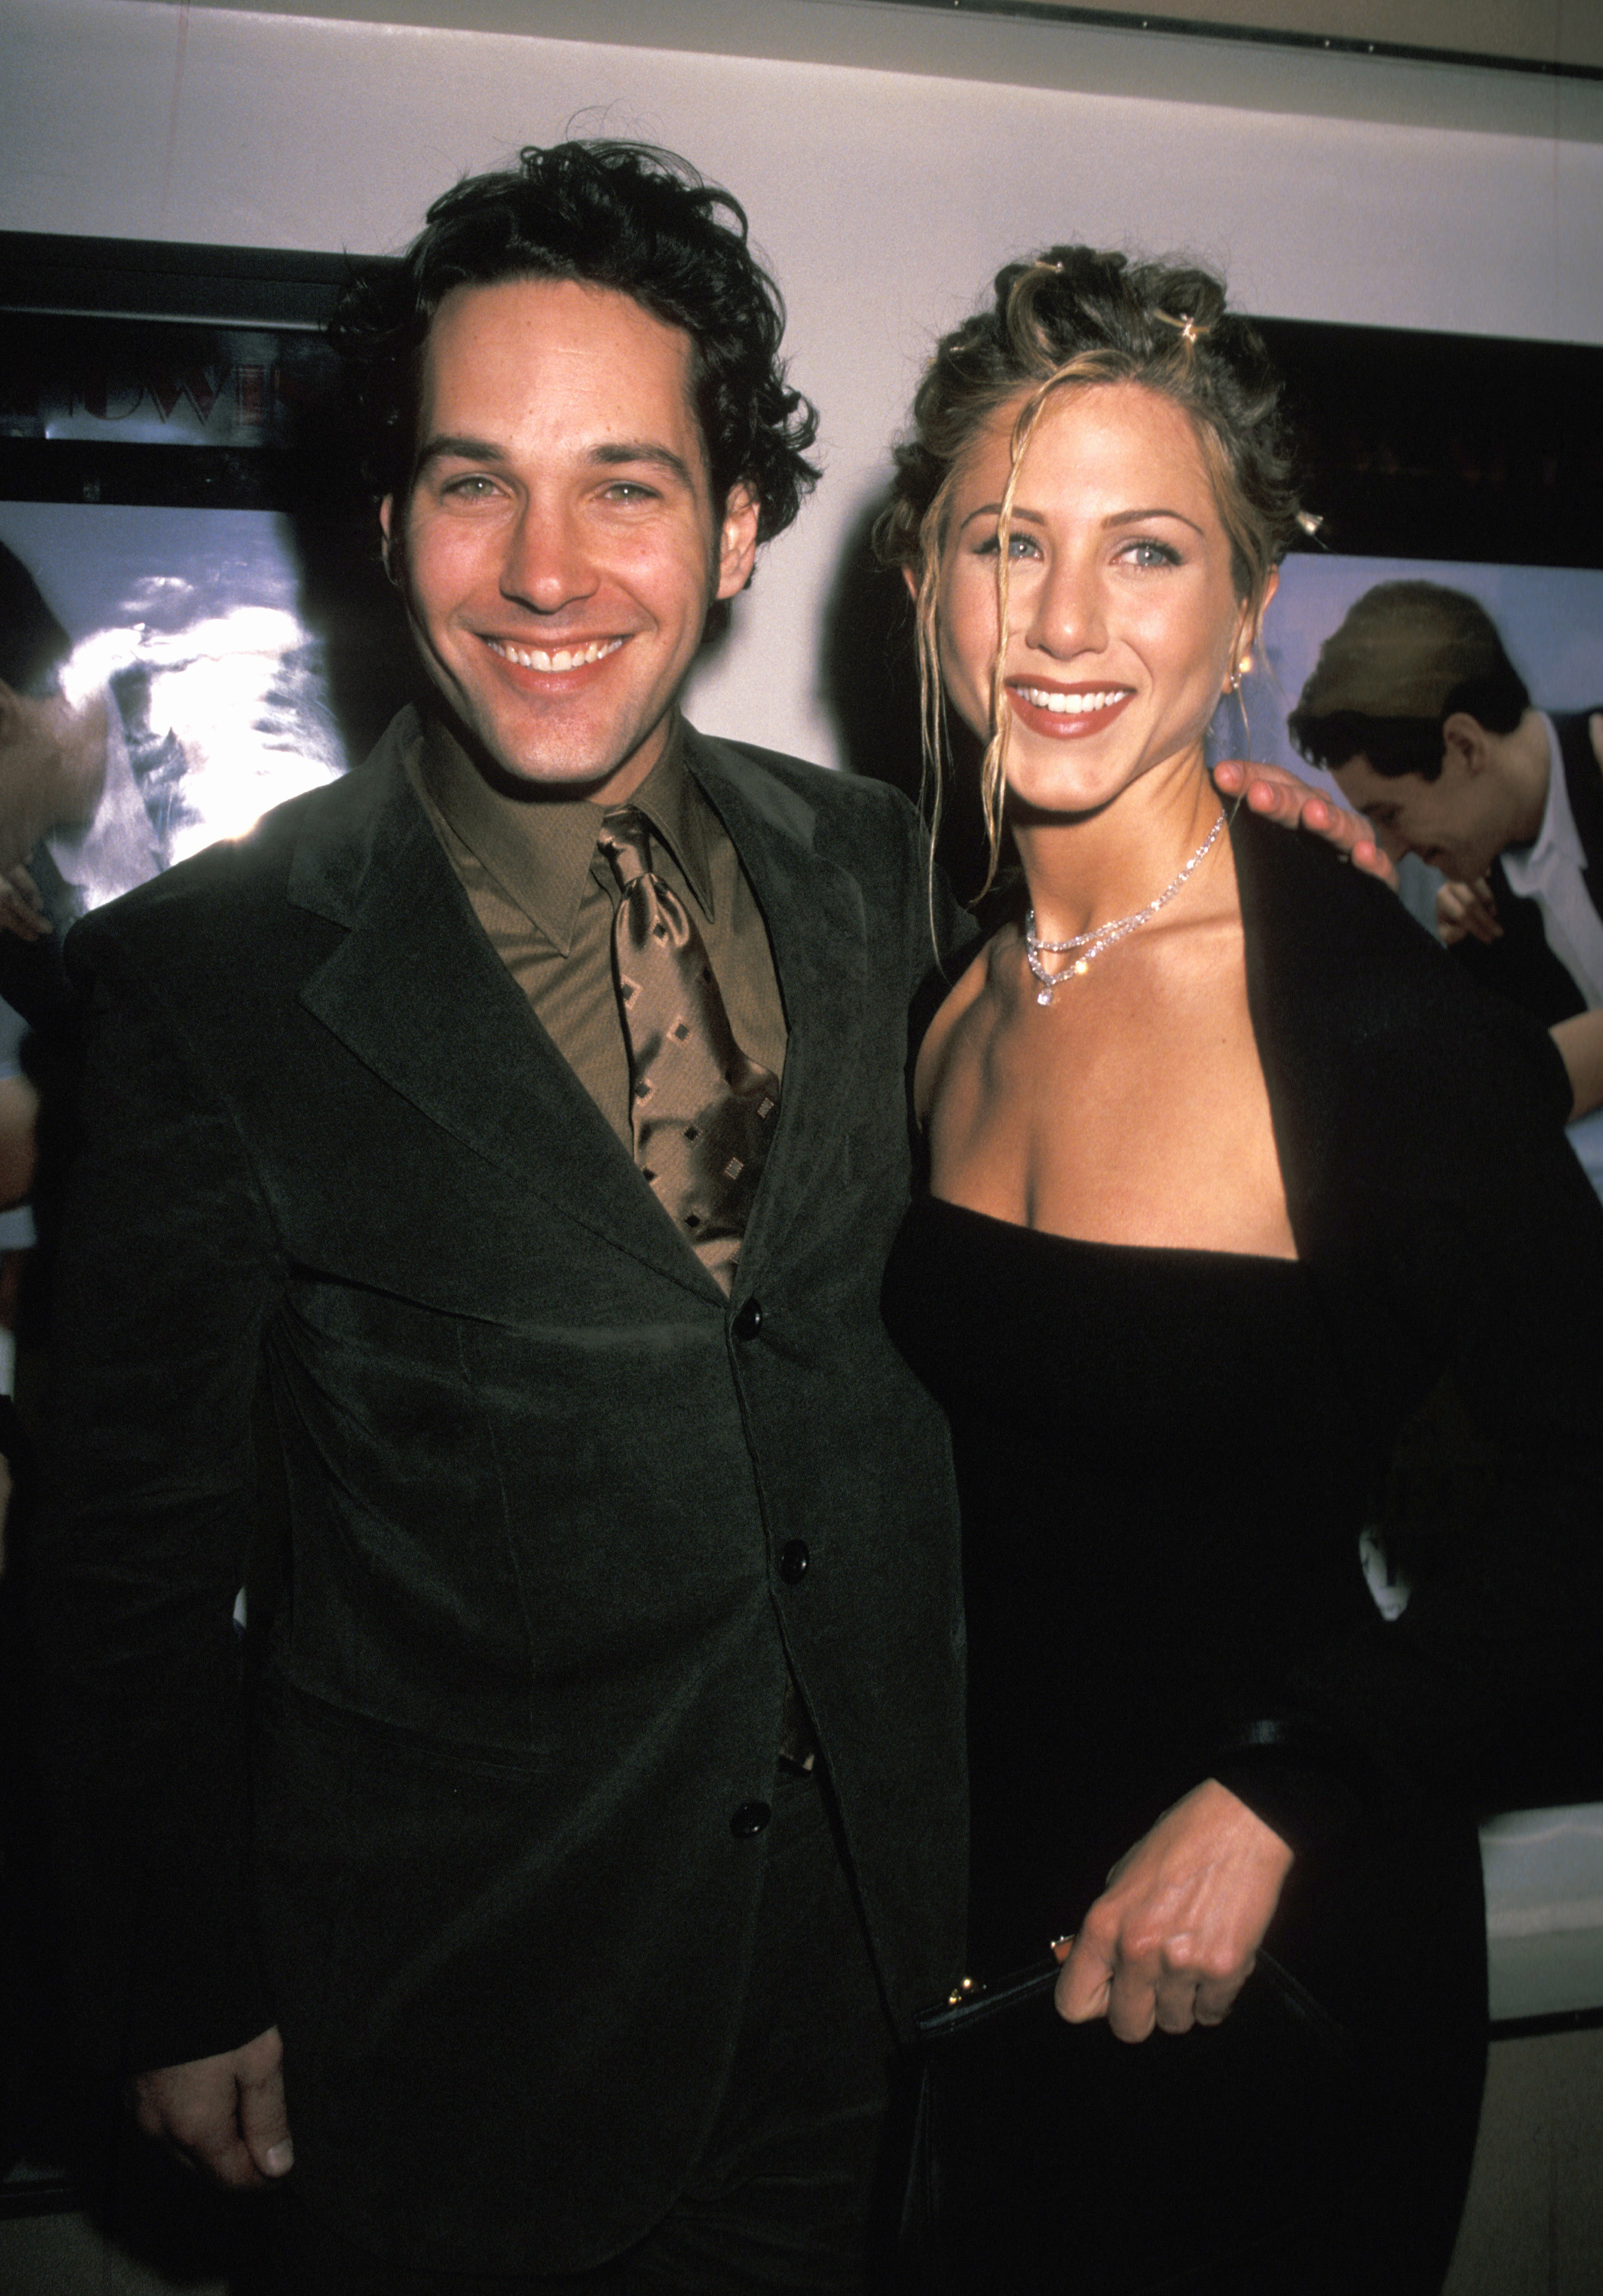 Paul Rudd and Jennifer Aniston at the New York screening of "The Object of My Affection" on April 15, 1998 | Source: Getty Image